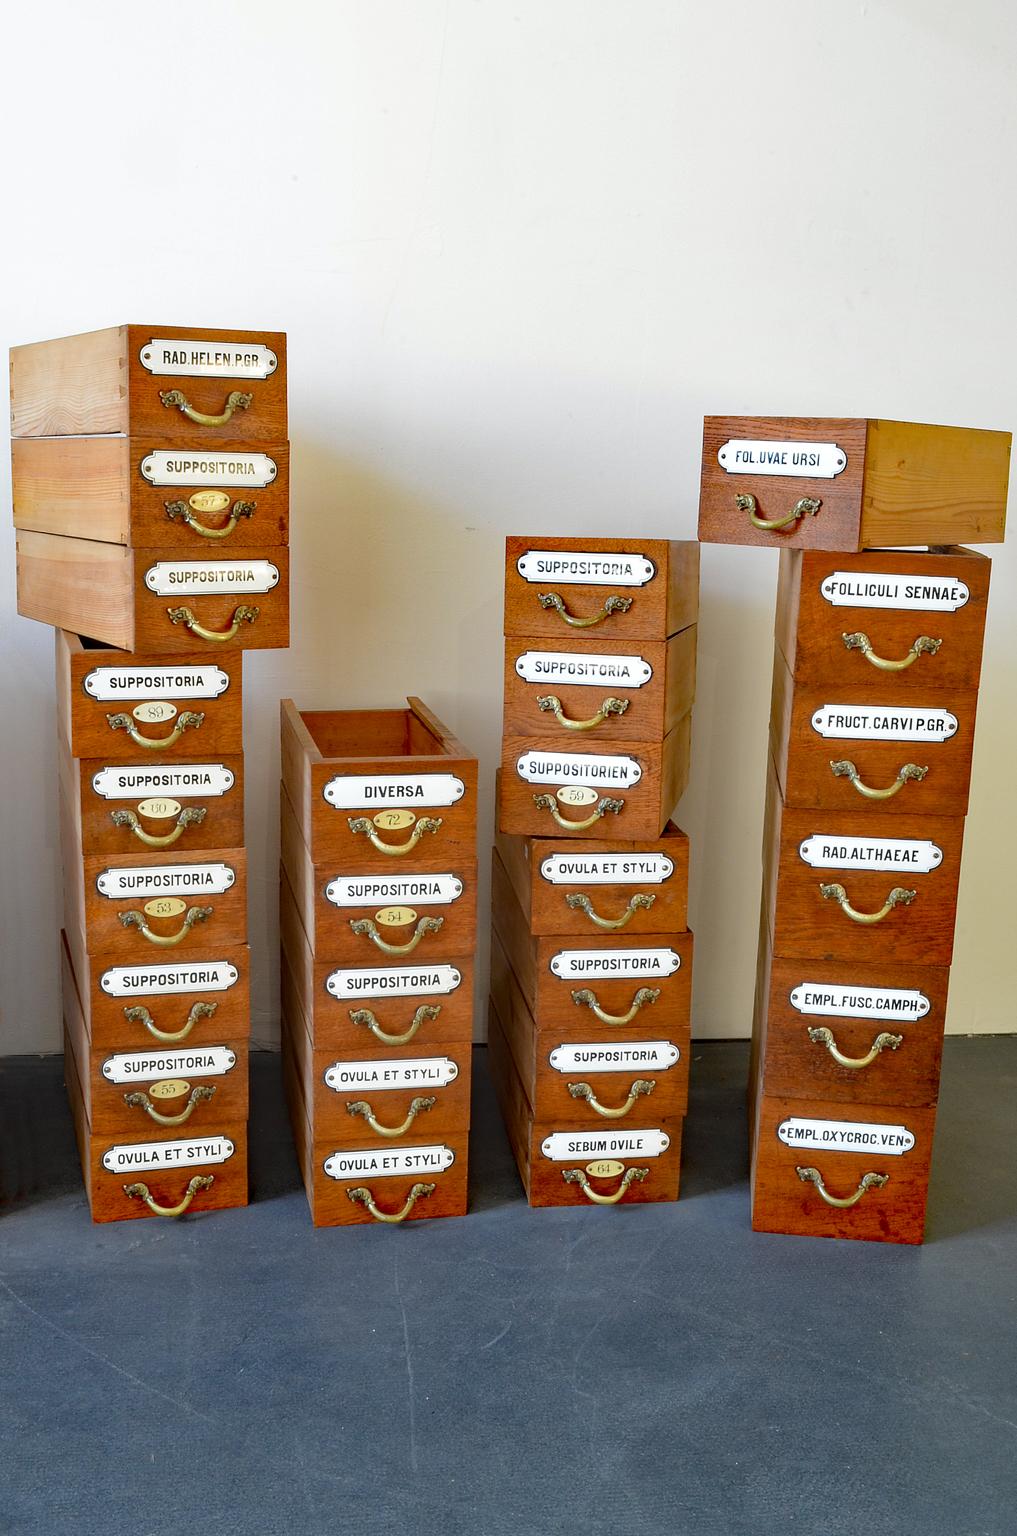 41 antique Apothecary drawers with enameled label and figurative bronze handle late 19th century from Germany.
Measure:
35 pieces: DxWxH in cm 38 x 15 x 9 
6 pieces: DxWxH in cm 38 x 17 x 11-15.